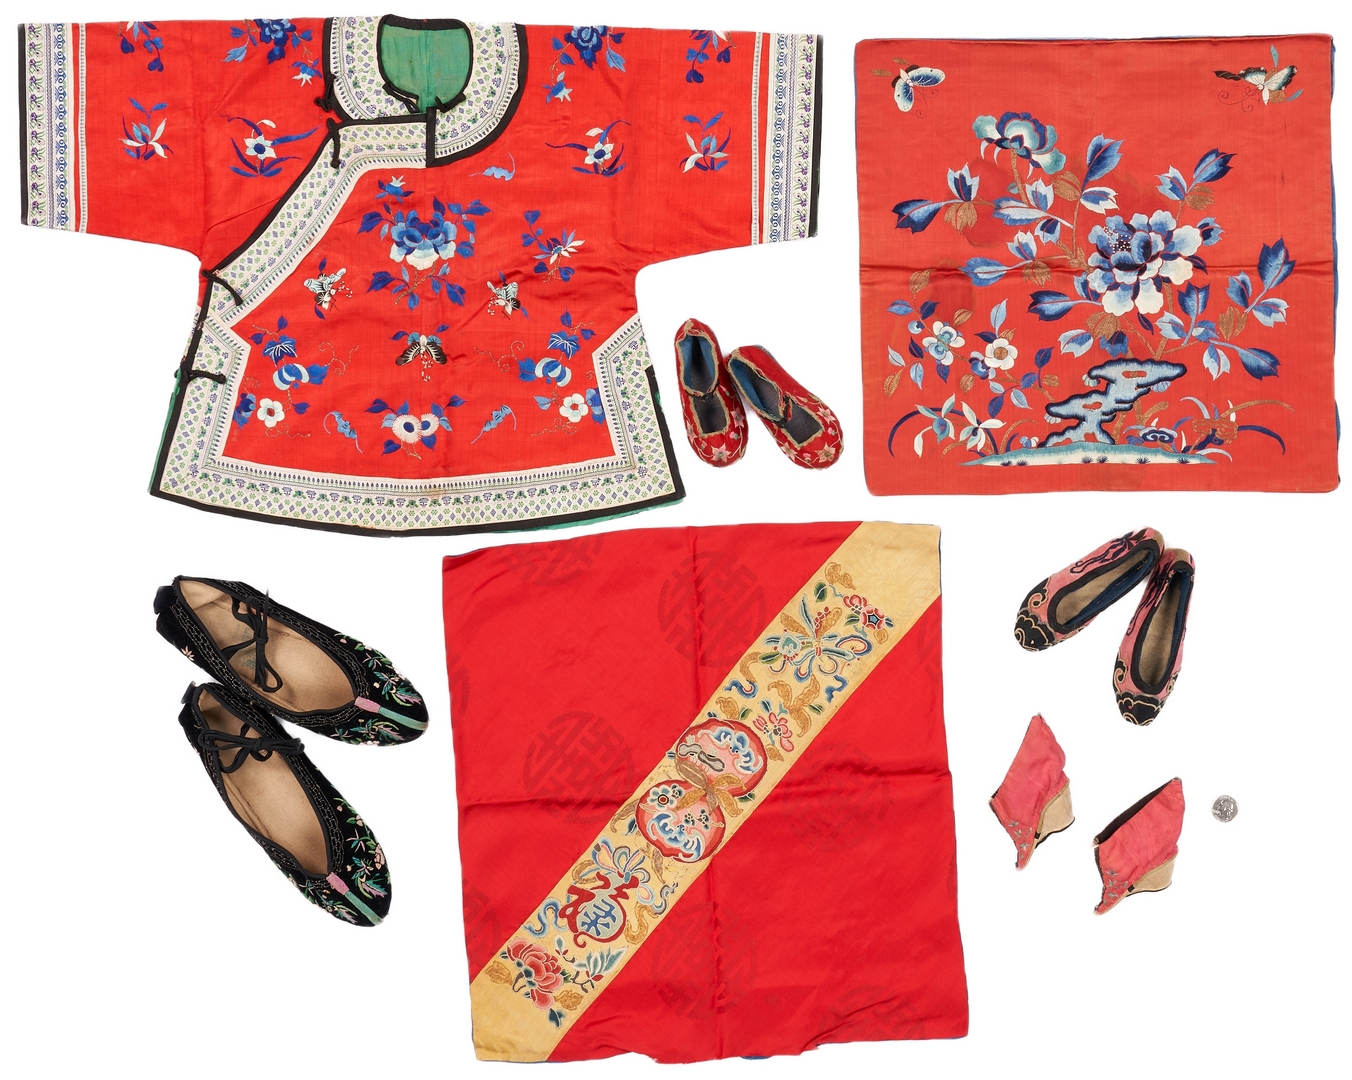 Lot 25: 7 Chinese Silk Embroidered Textiles | Case Auctions